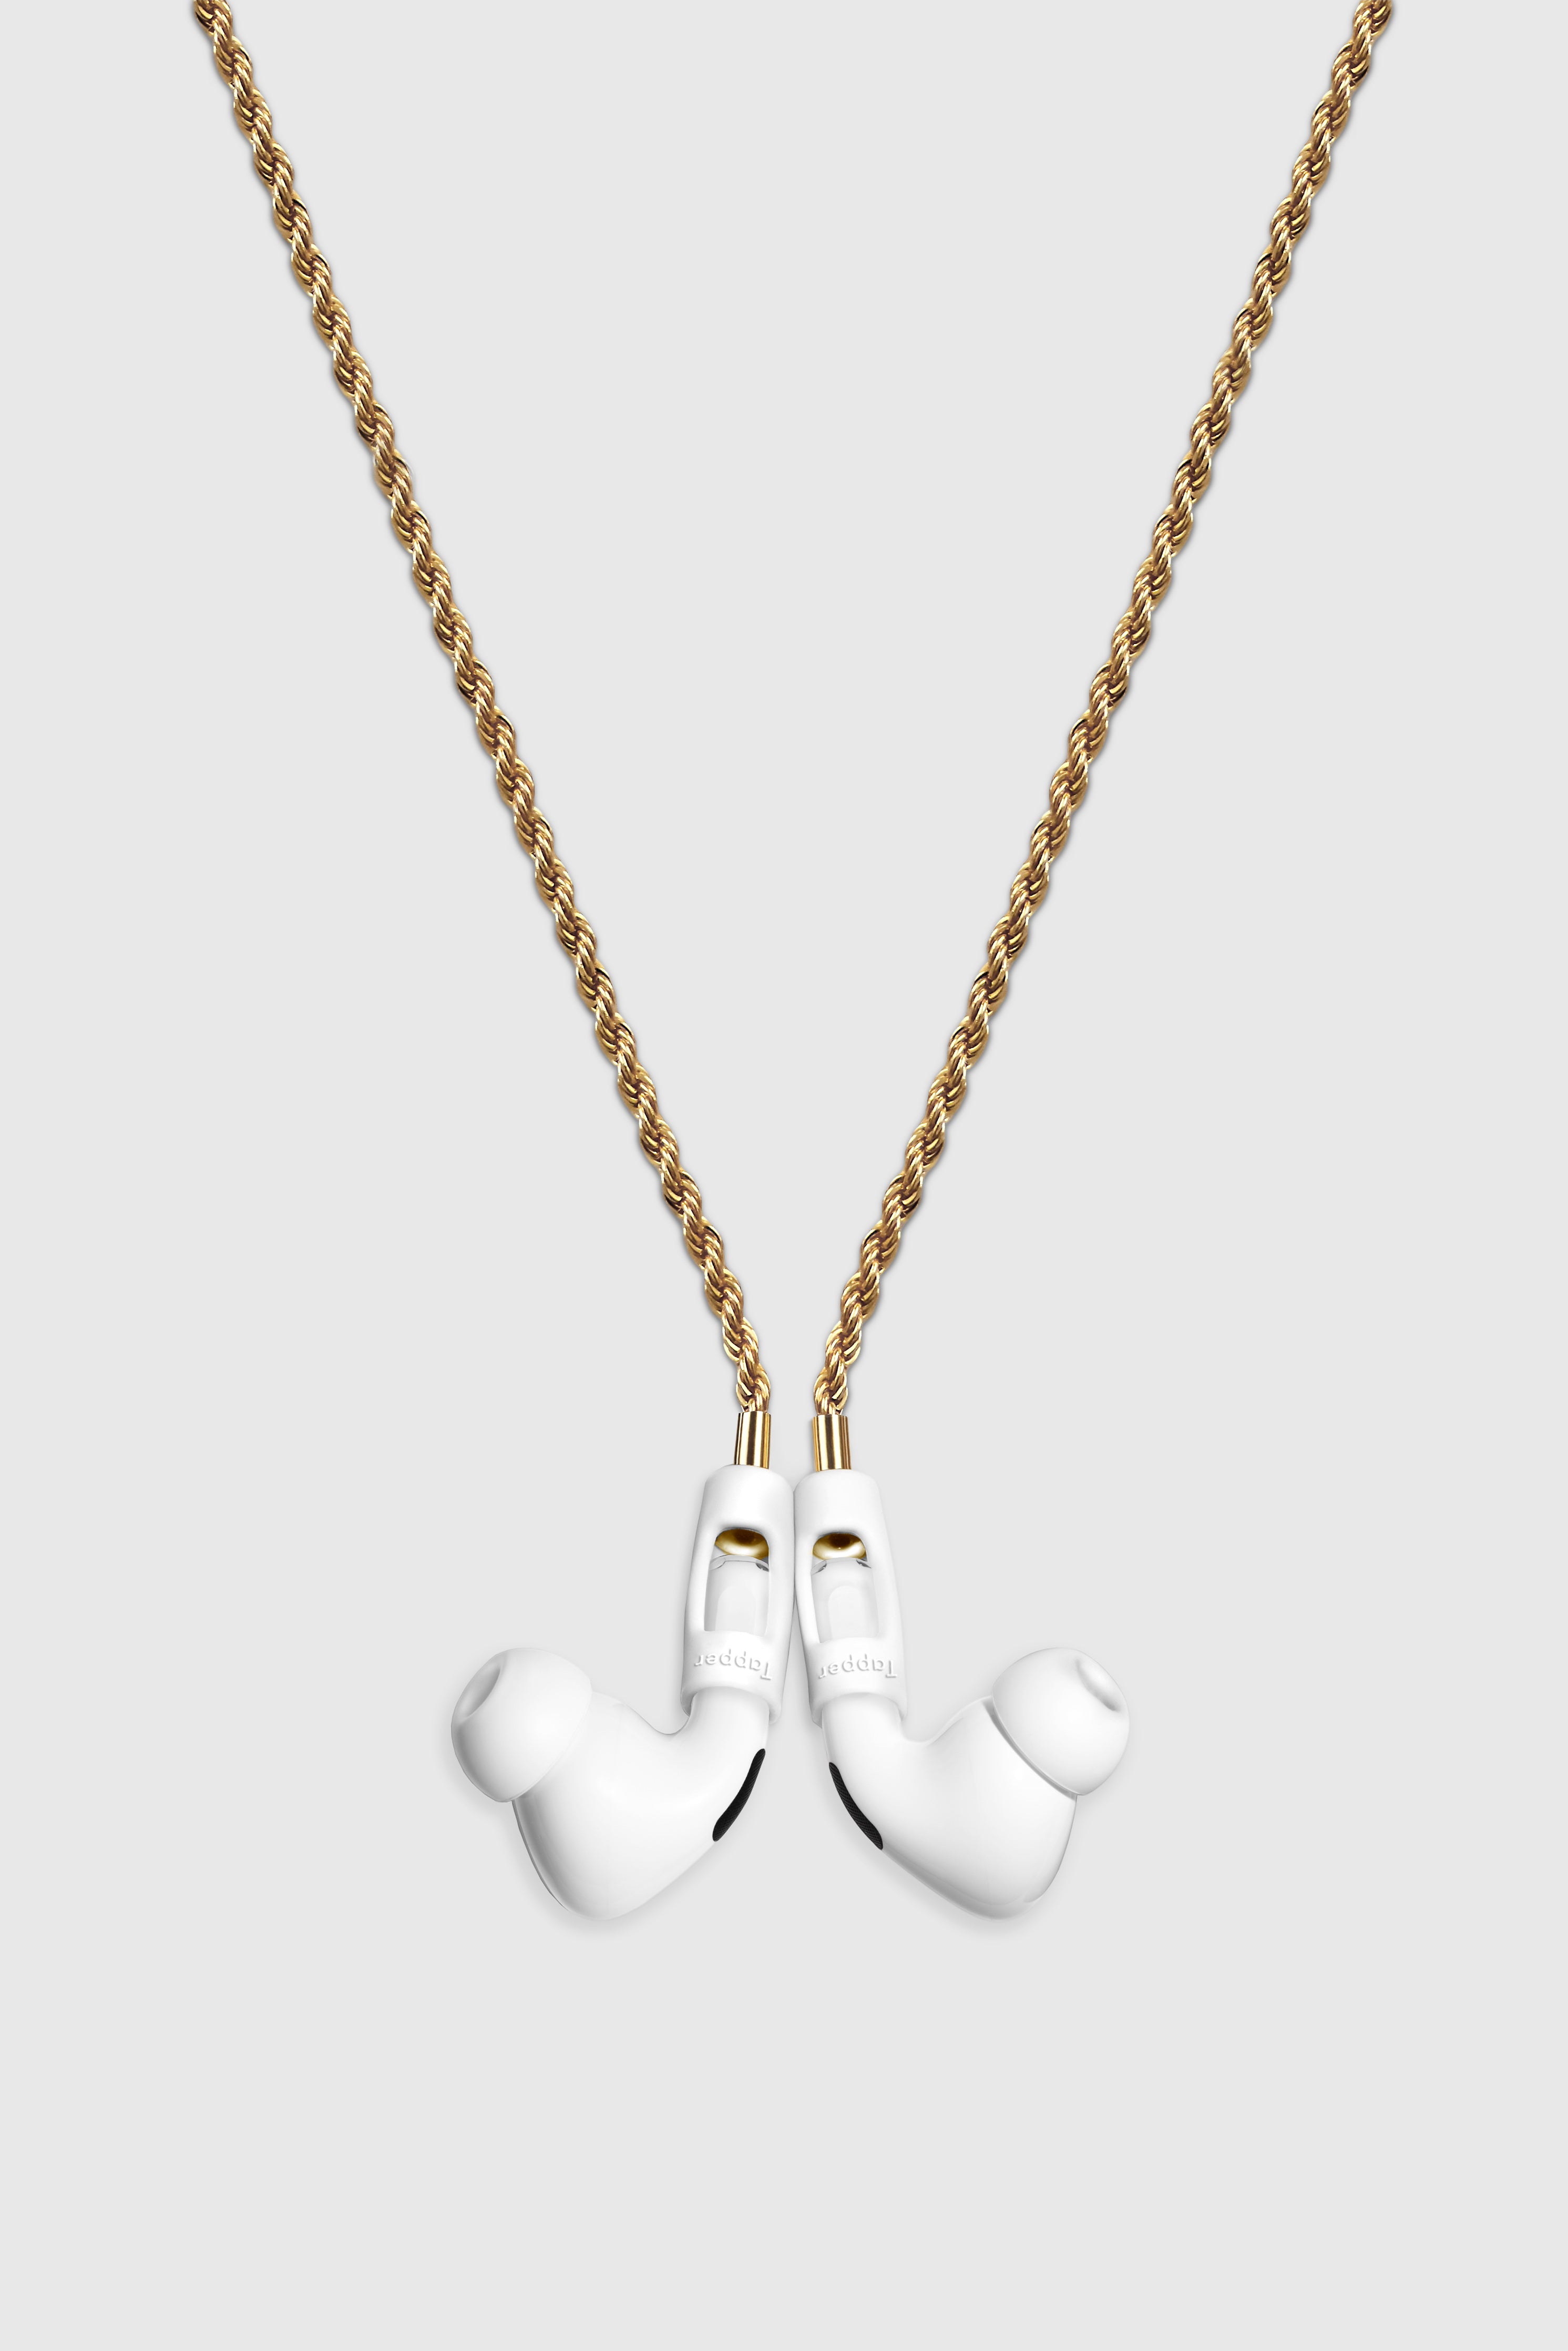 Tapper 18K Gold Plated Rope Chain Necklace for Apple AirPods and AirPods Pro (compatible with All Generations). Designed in Sweden.